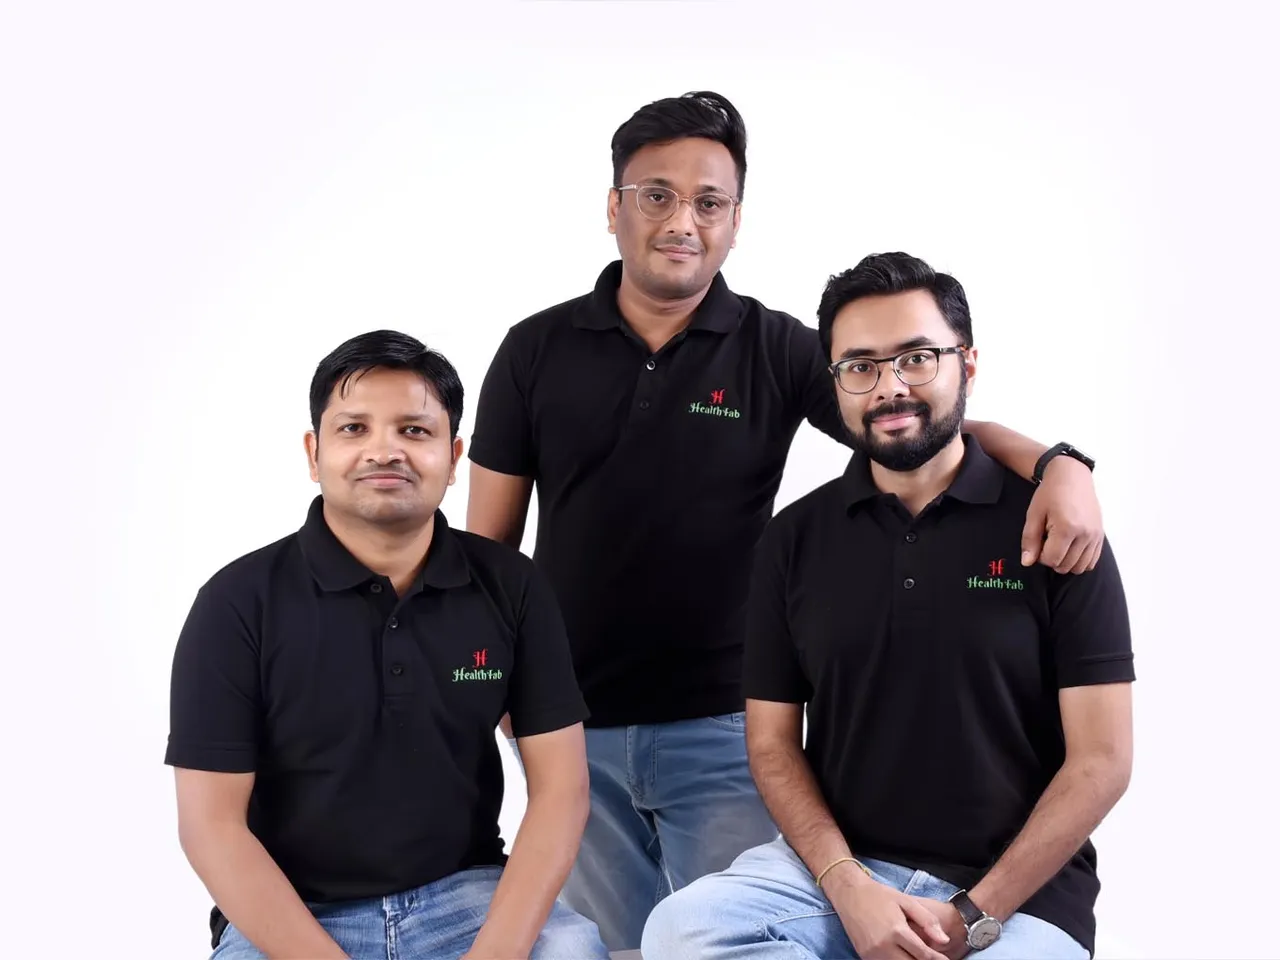 Femtech D2C startup Healthfab raises $286K in funding led by Beyondseed, others